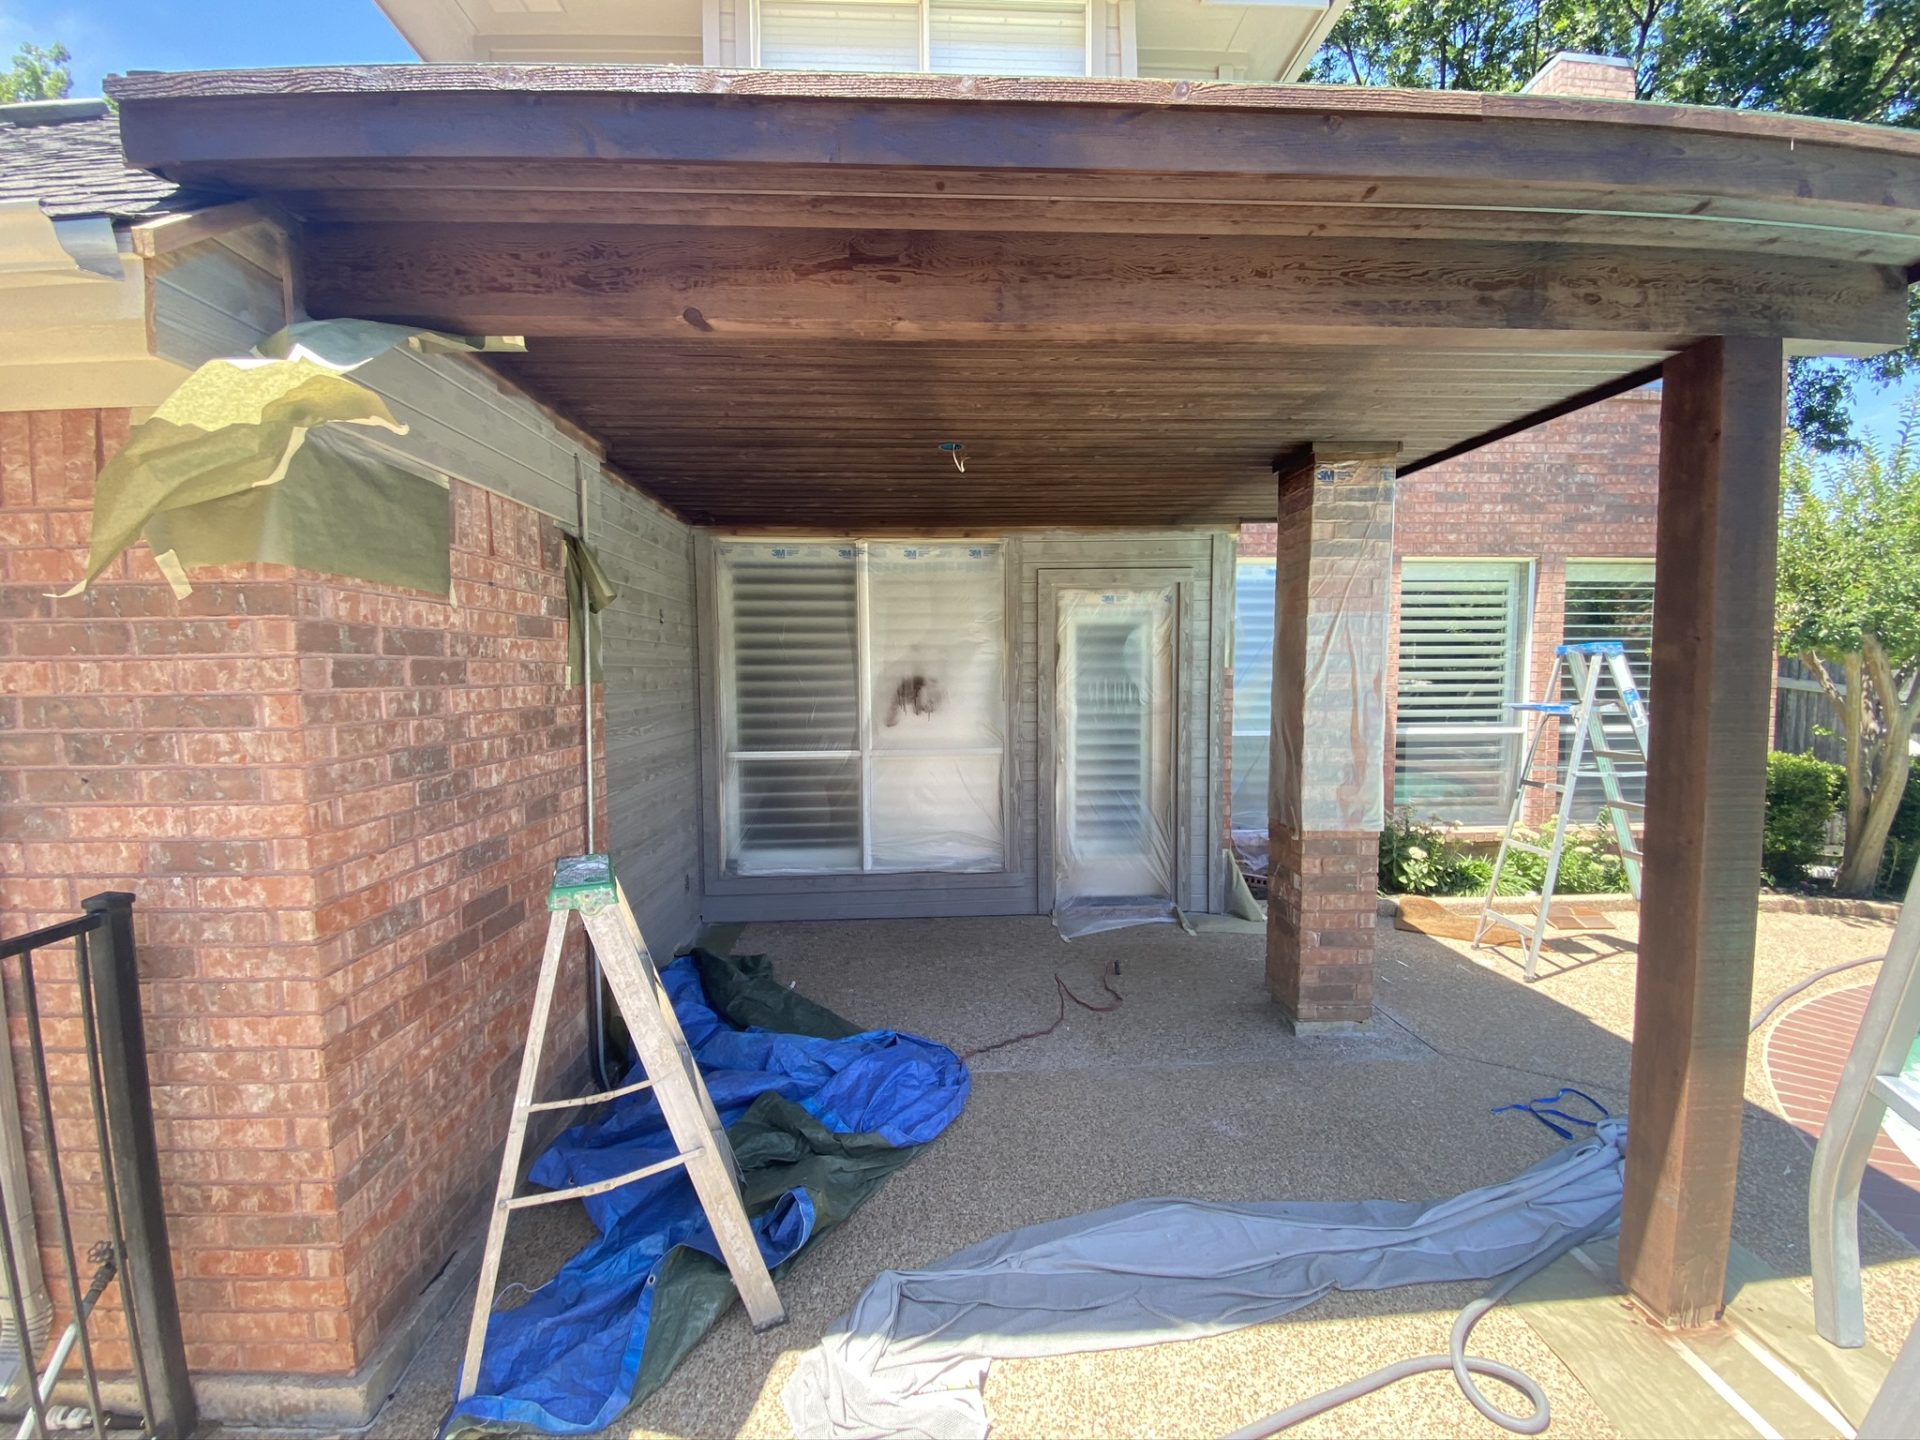 Construction of a patio roof that extends living space in an Arlington, TX homeowner's backyard.